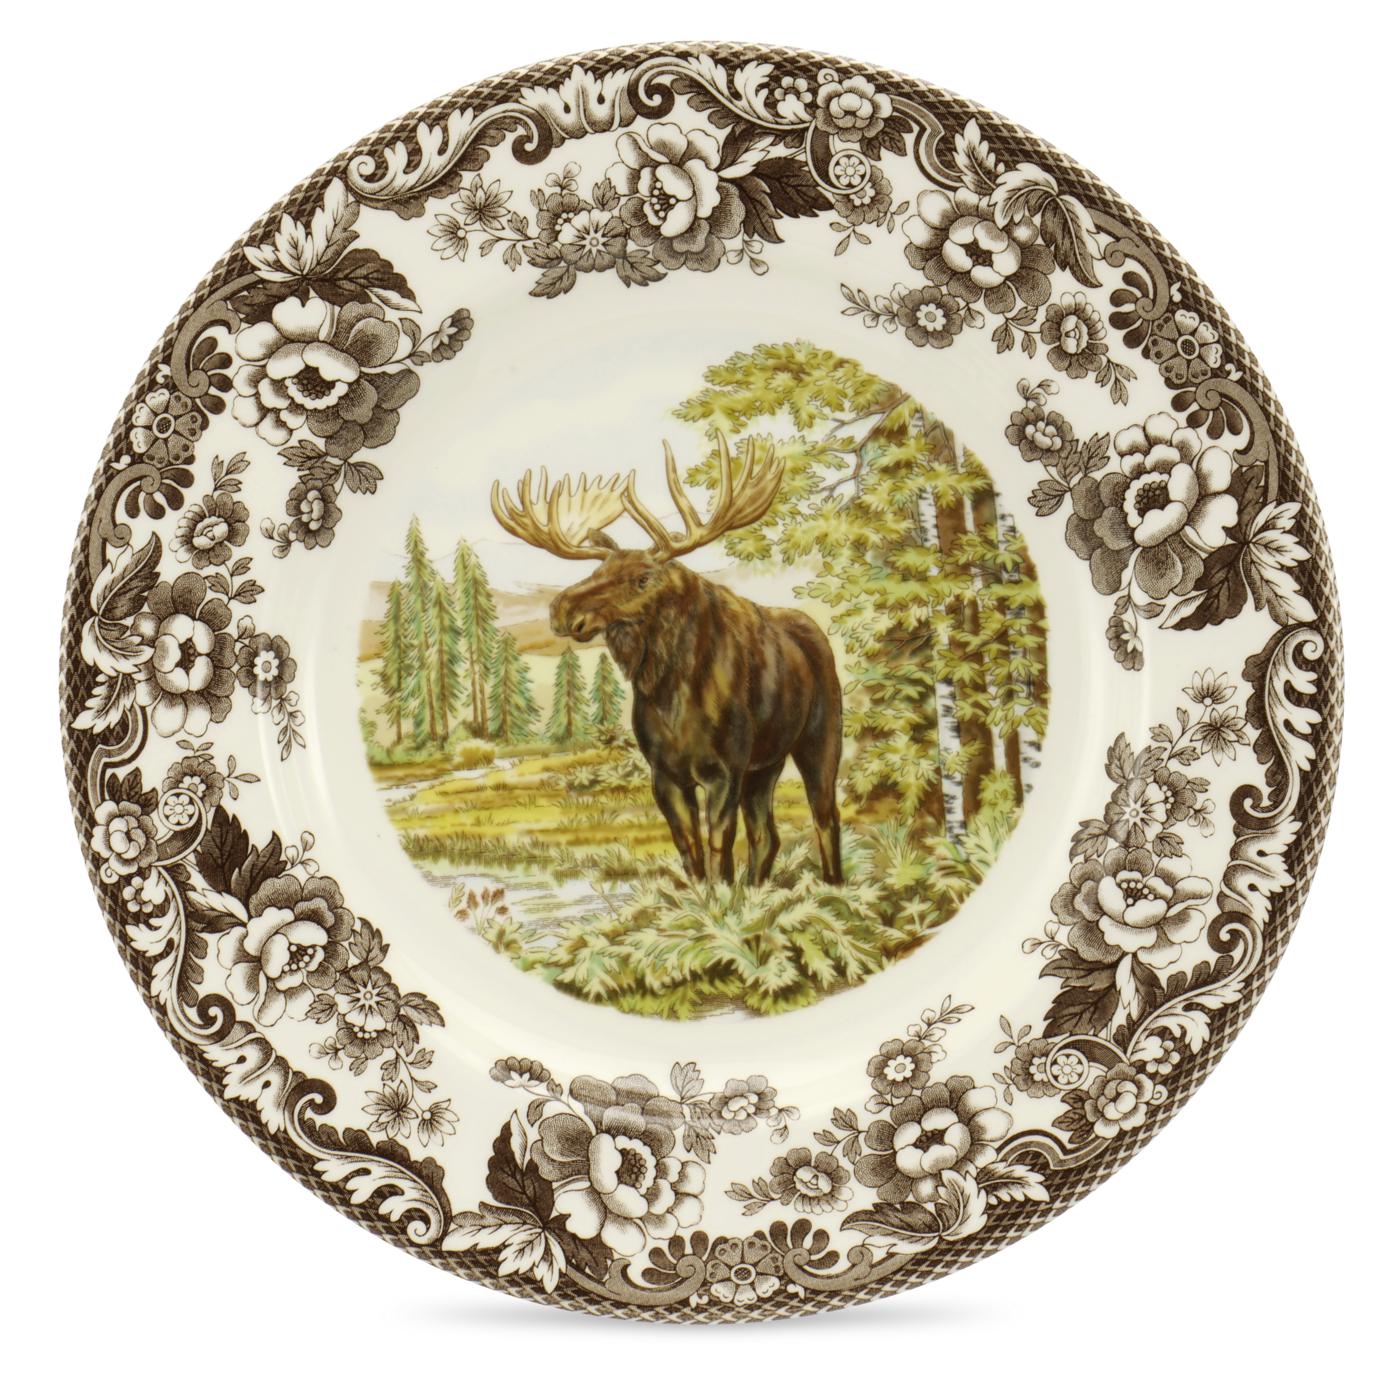 Spode Woodland Dinner Plate, Magestic Moose